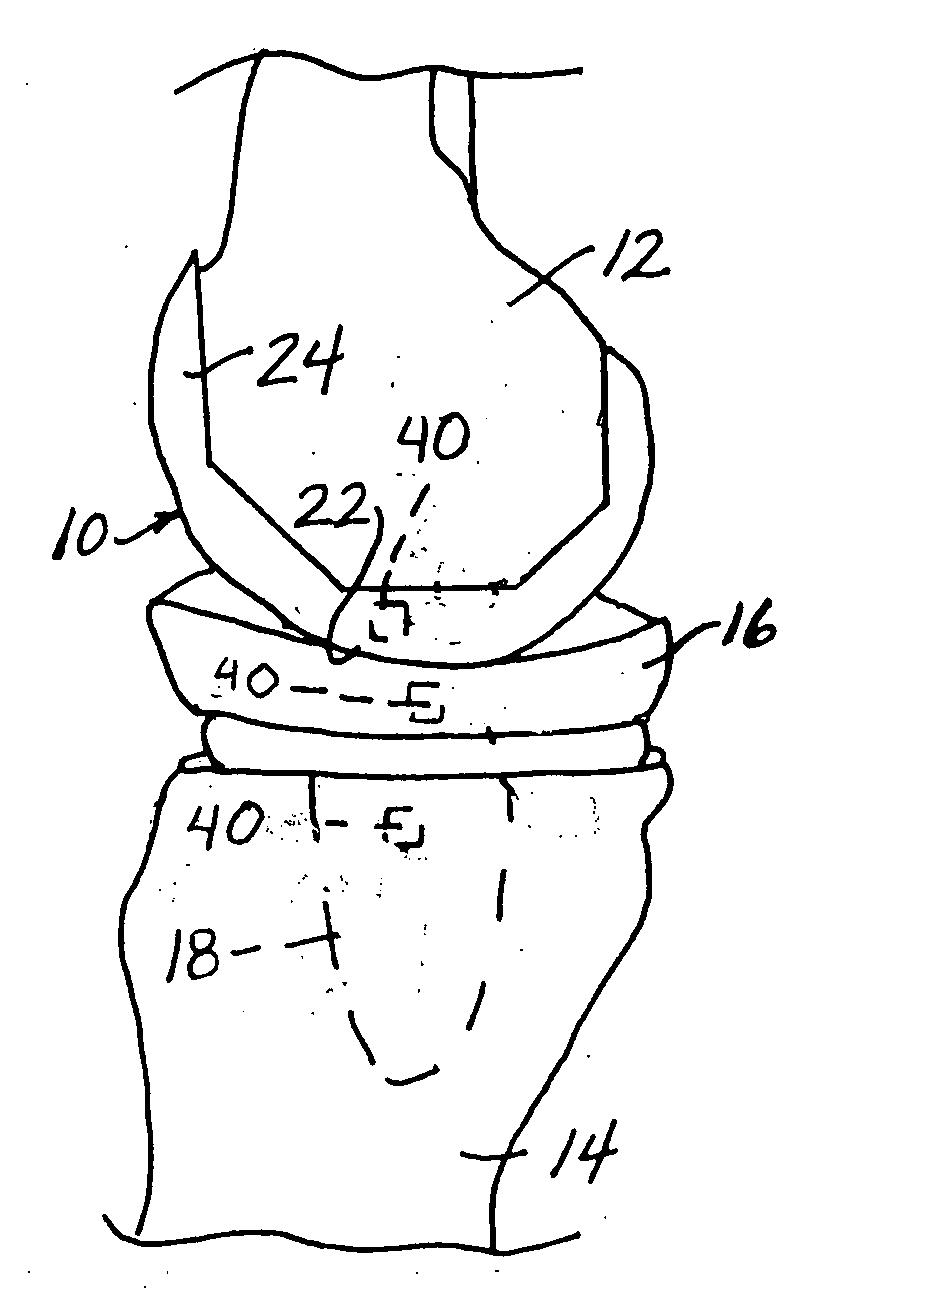 Orthopaedic components with data storage element